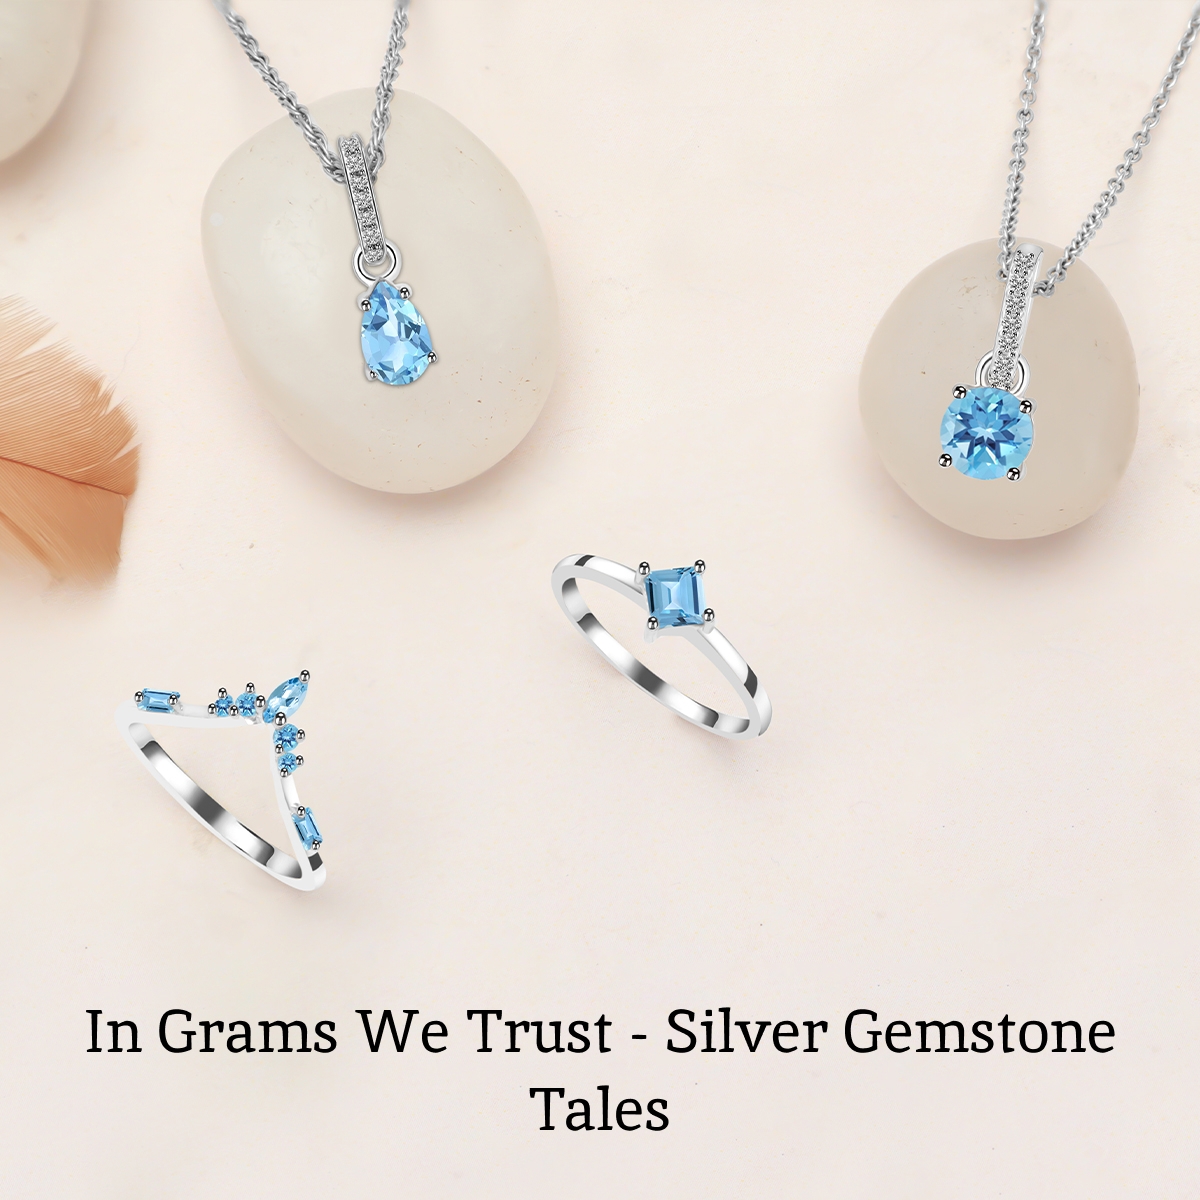 Why Should You Think of Buying Silver Gemstone Jewellery in Gram?